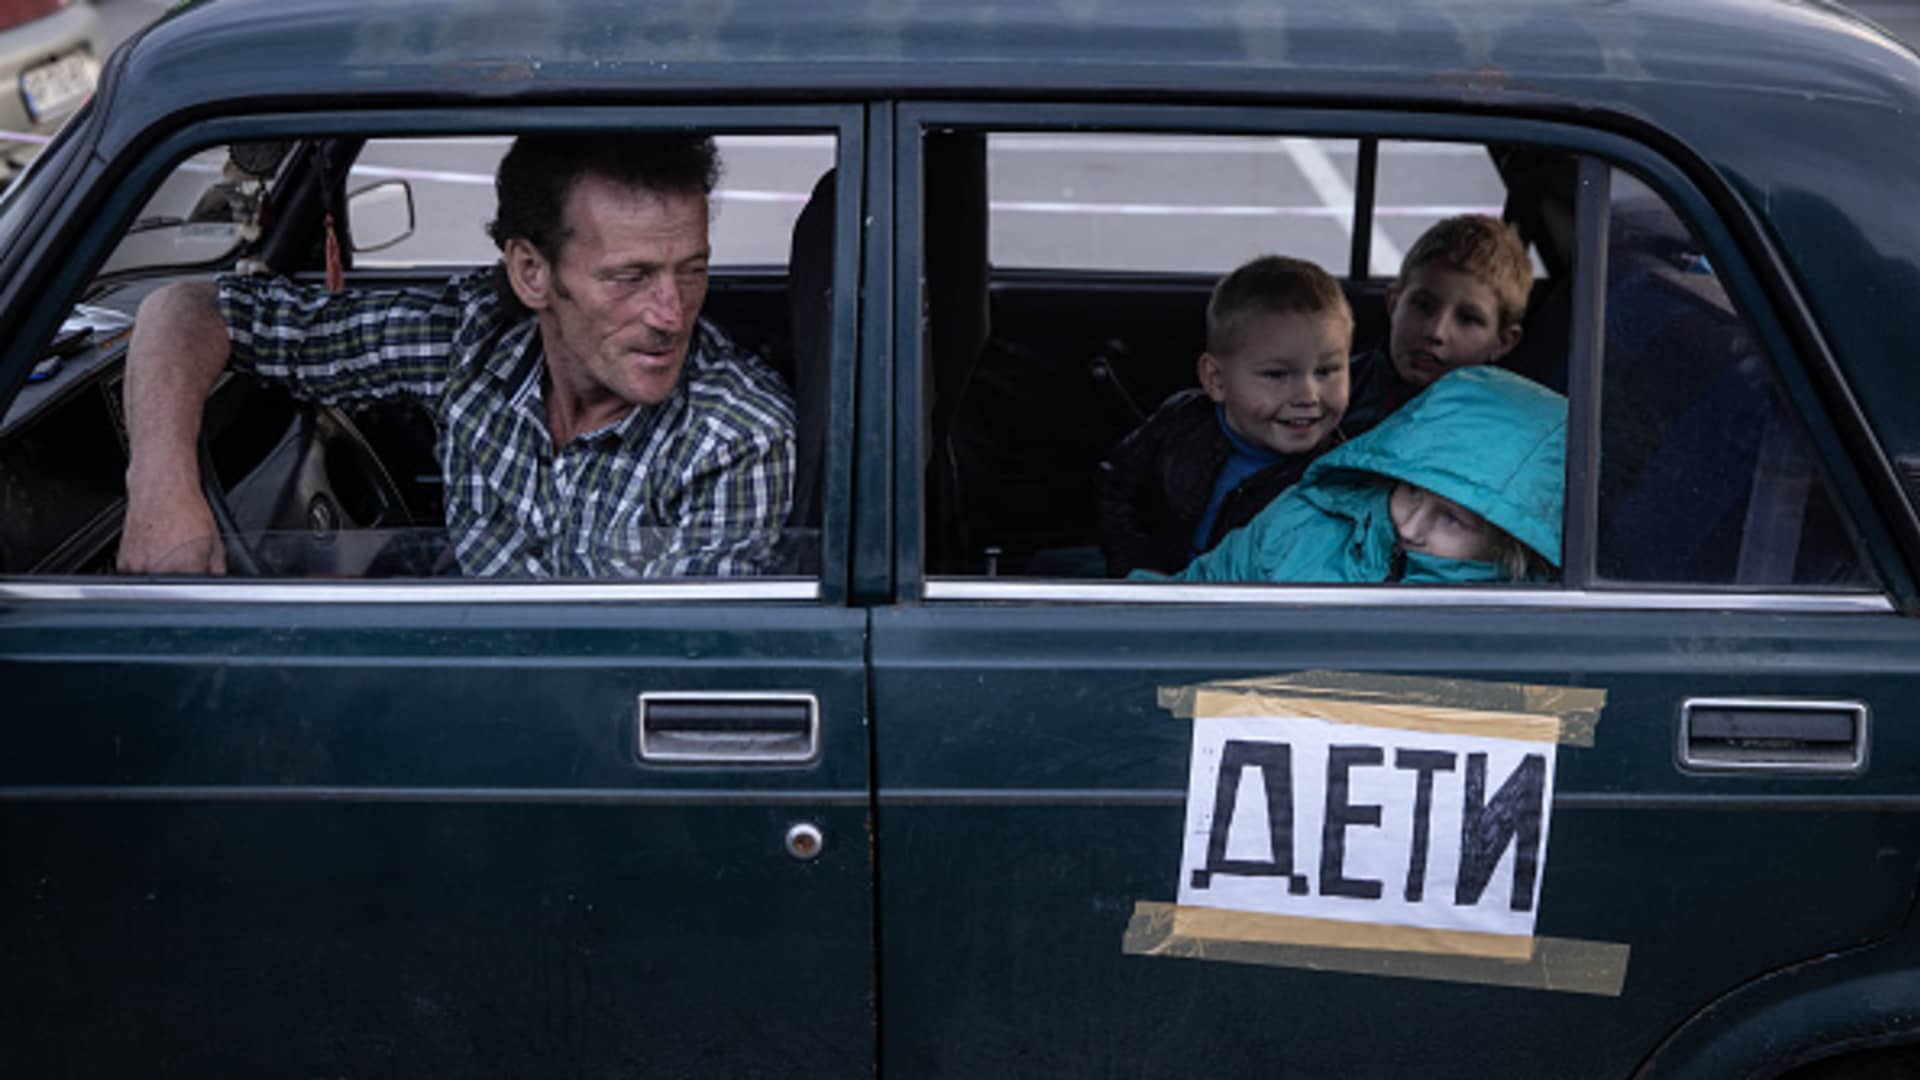 A family from Mariupol wait in their car to be registered by police after arriving at an evacuation point for people fleeing Mariupol, Melitopol and the surrounding towns under Russian control on May 02, 2022 in Zaporizhzhia, Ukraine.